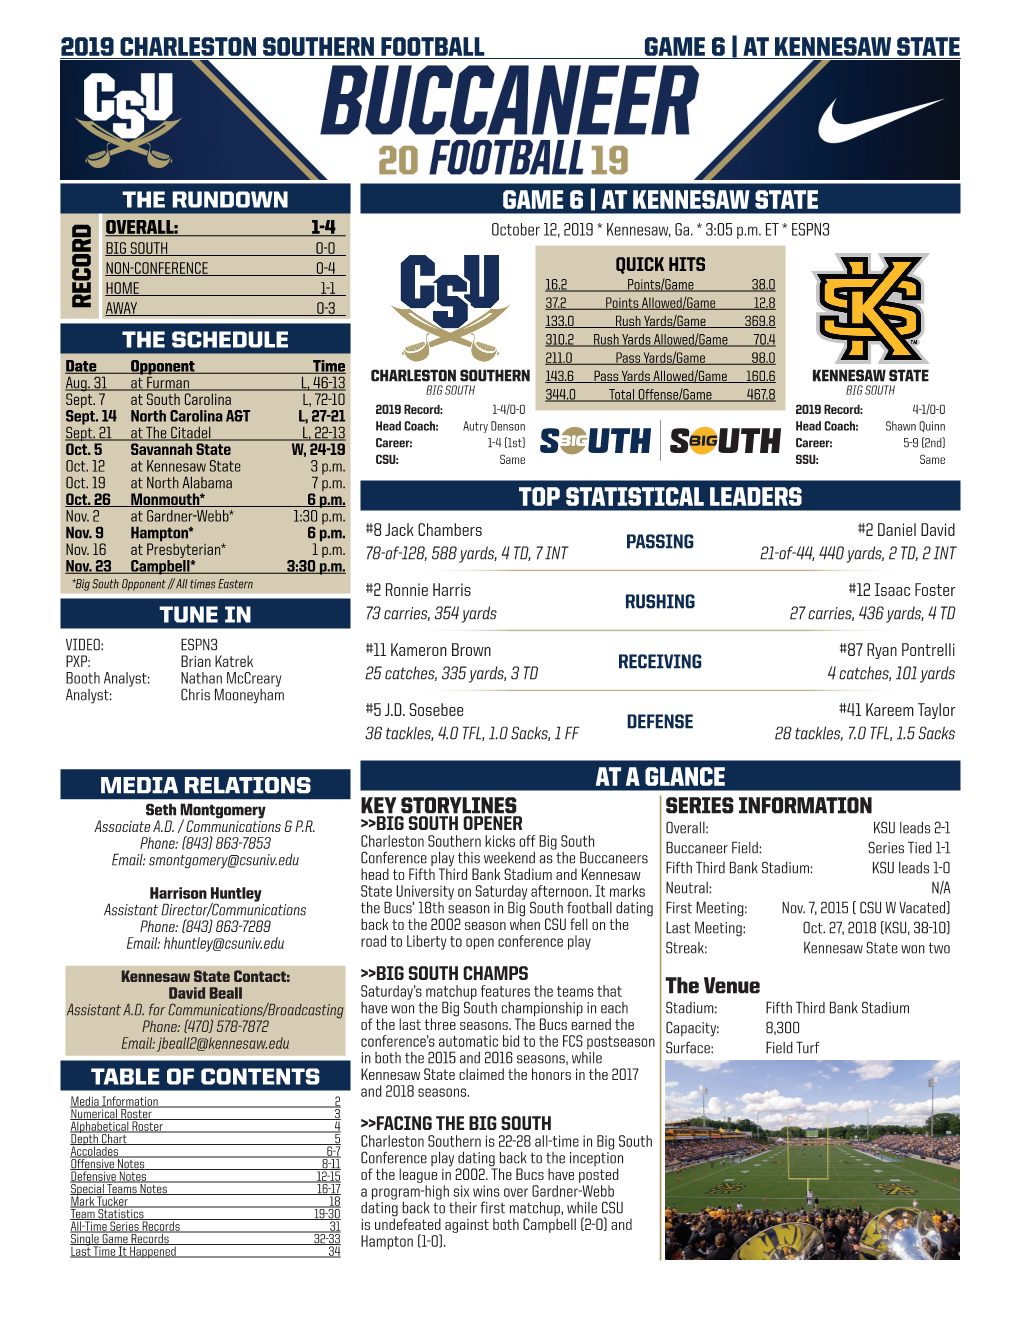 2019 Charleston Southern Football Game 6 | at Kennesaw State